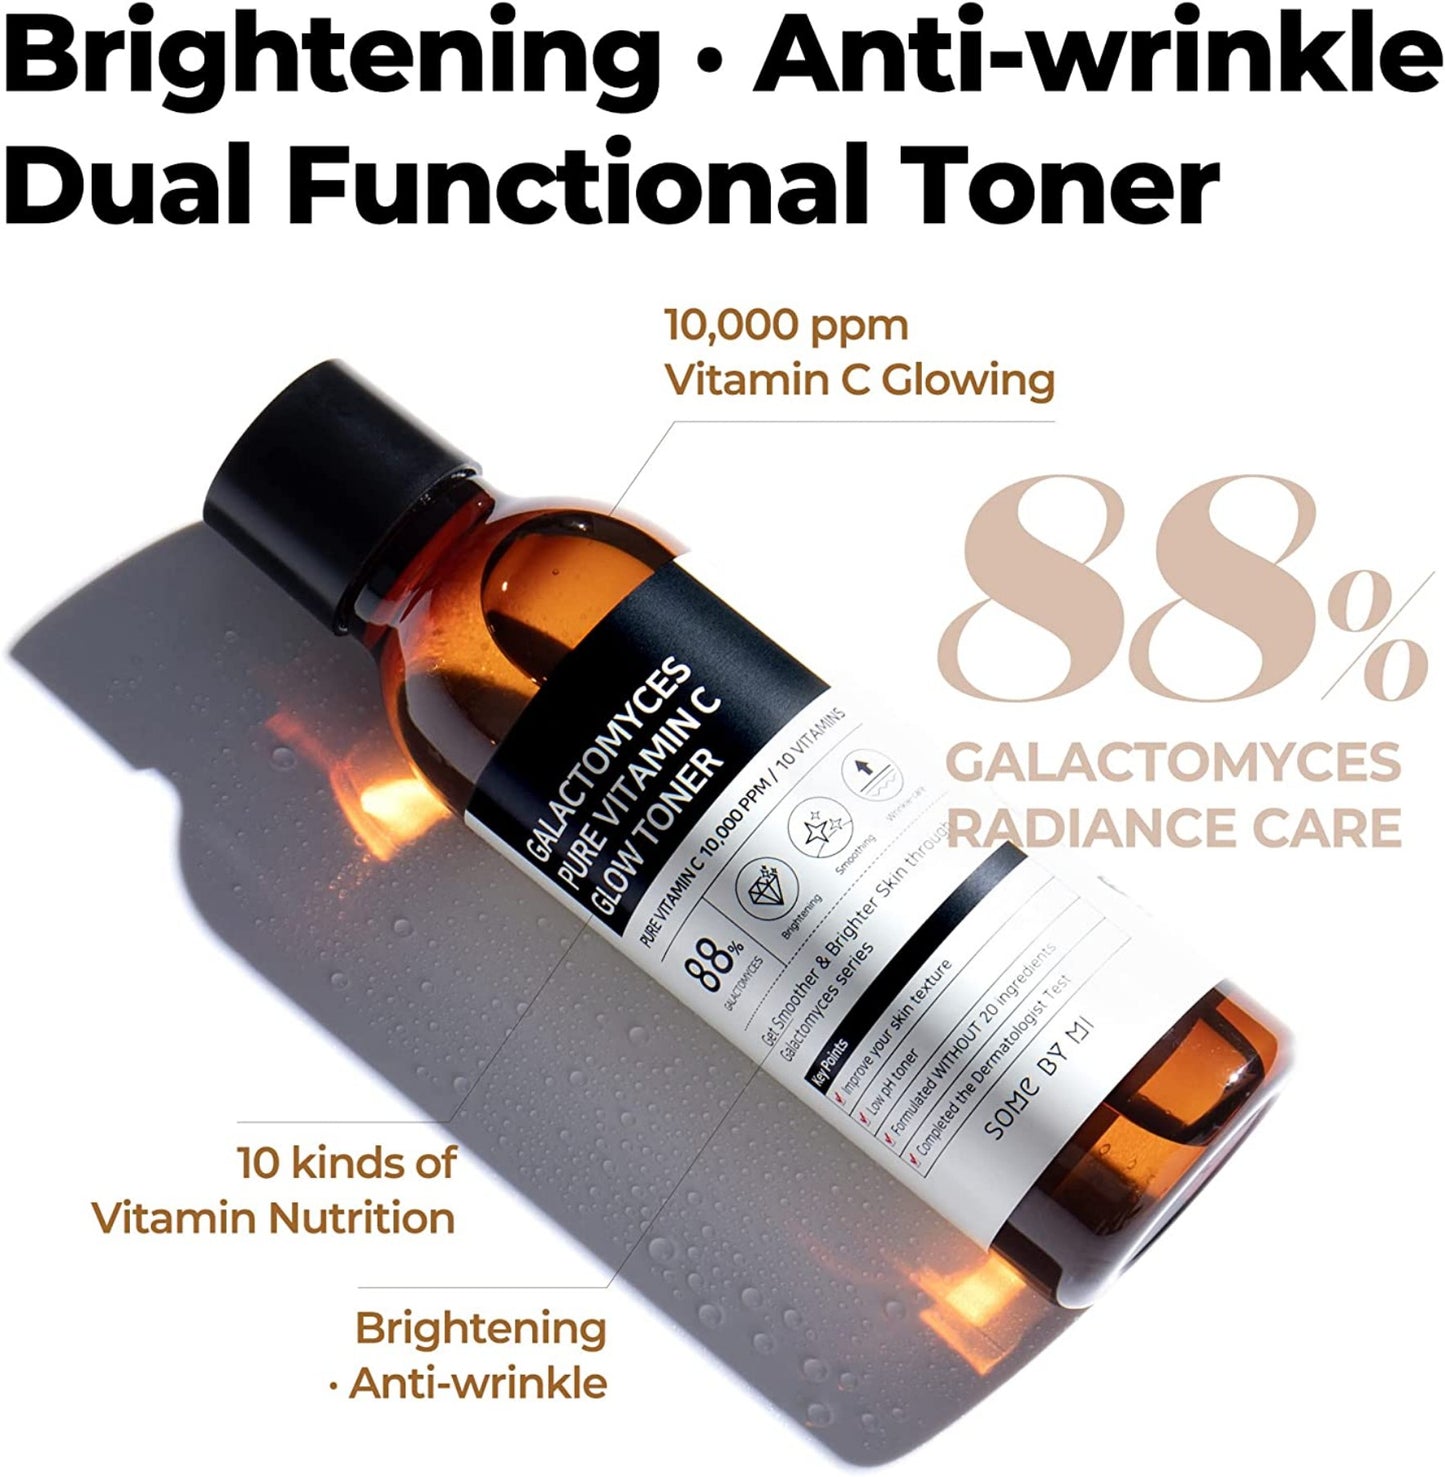 SOME BY MI Galactomyces Pure Vitamin C Glow Toner 6.76Oz/200ml  Brightening and Refreshing Effect, Improvement of Skin Irritation and Elasticity, Korean Skin Care